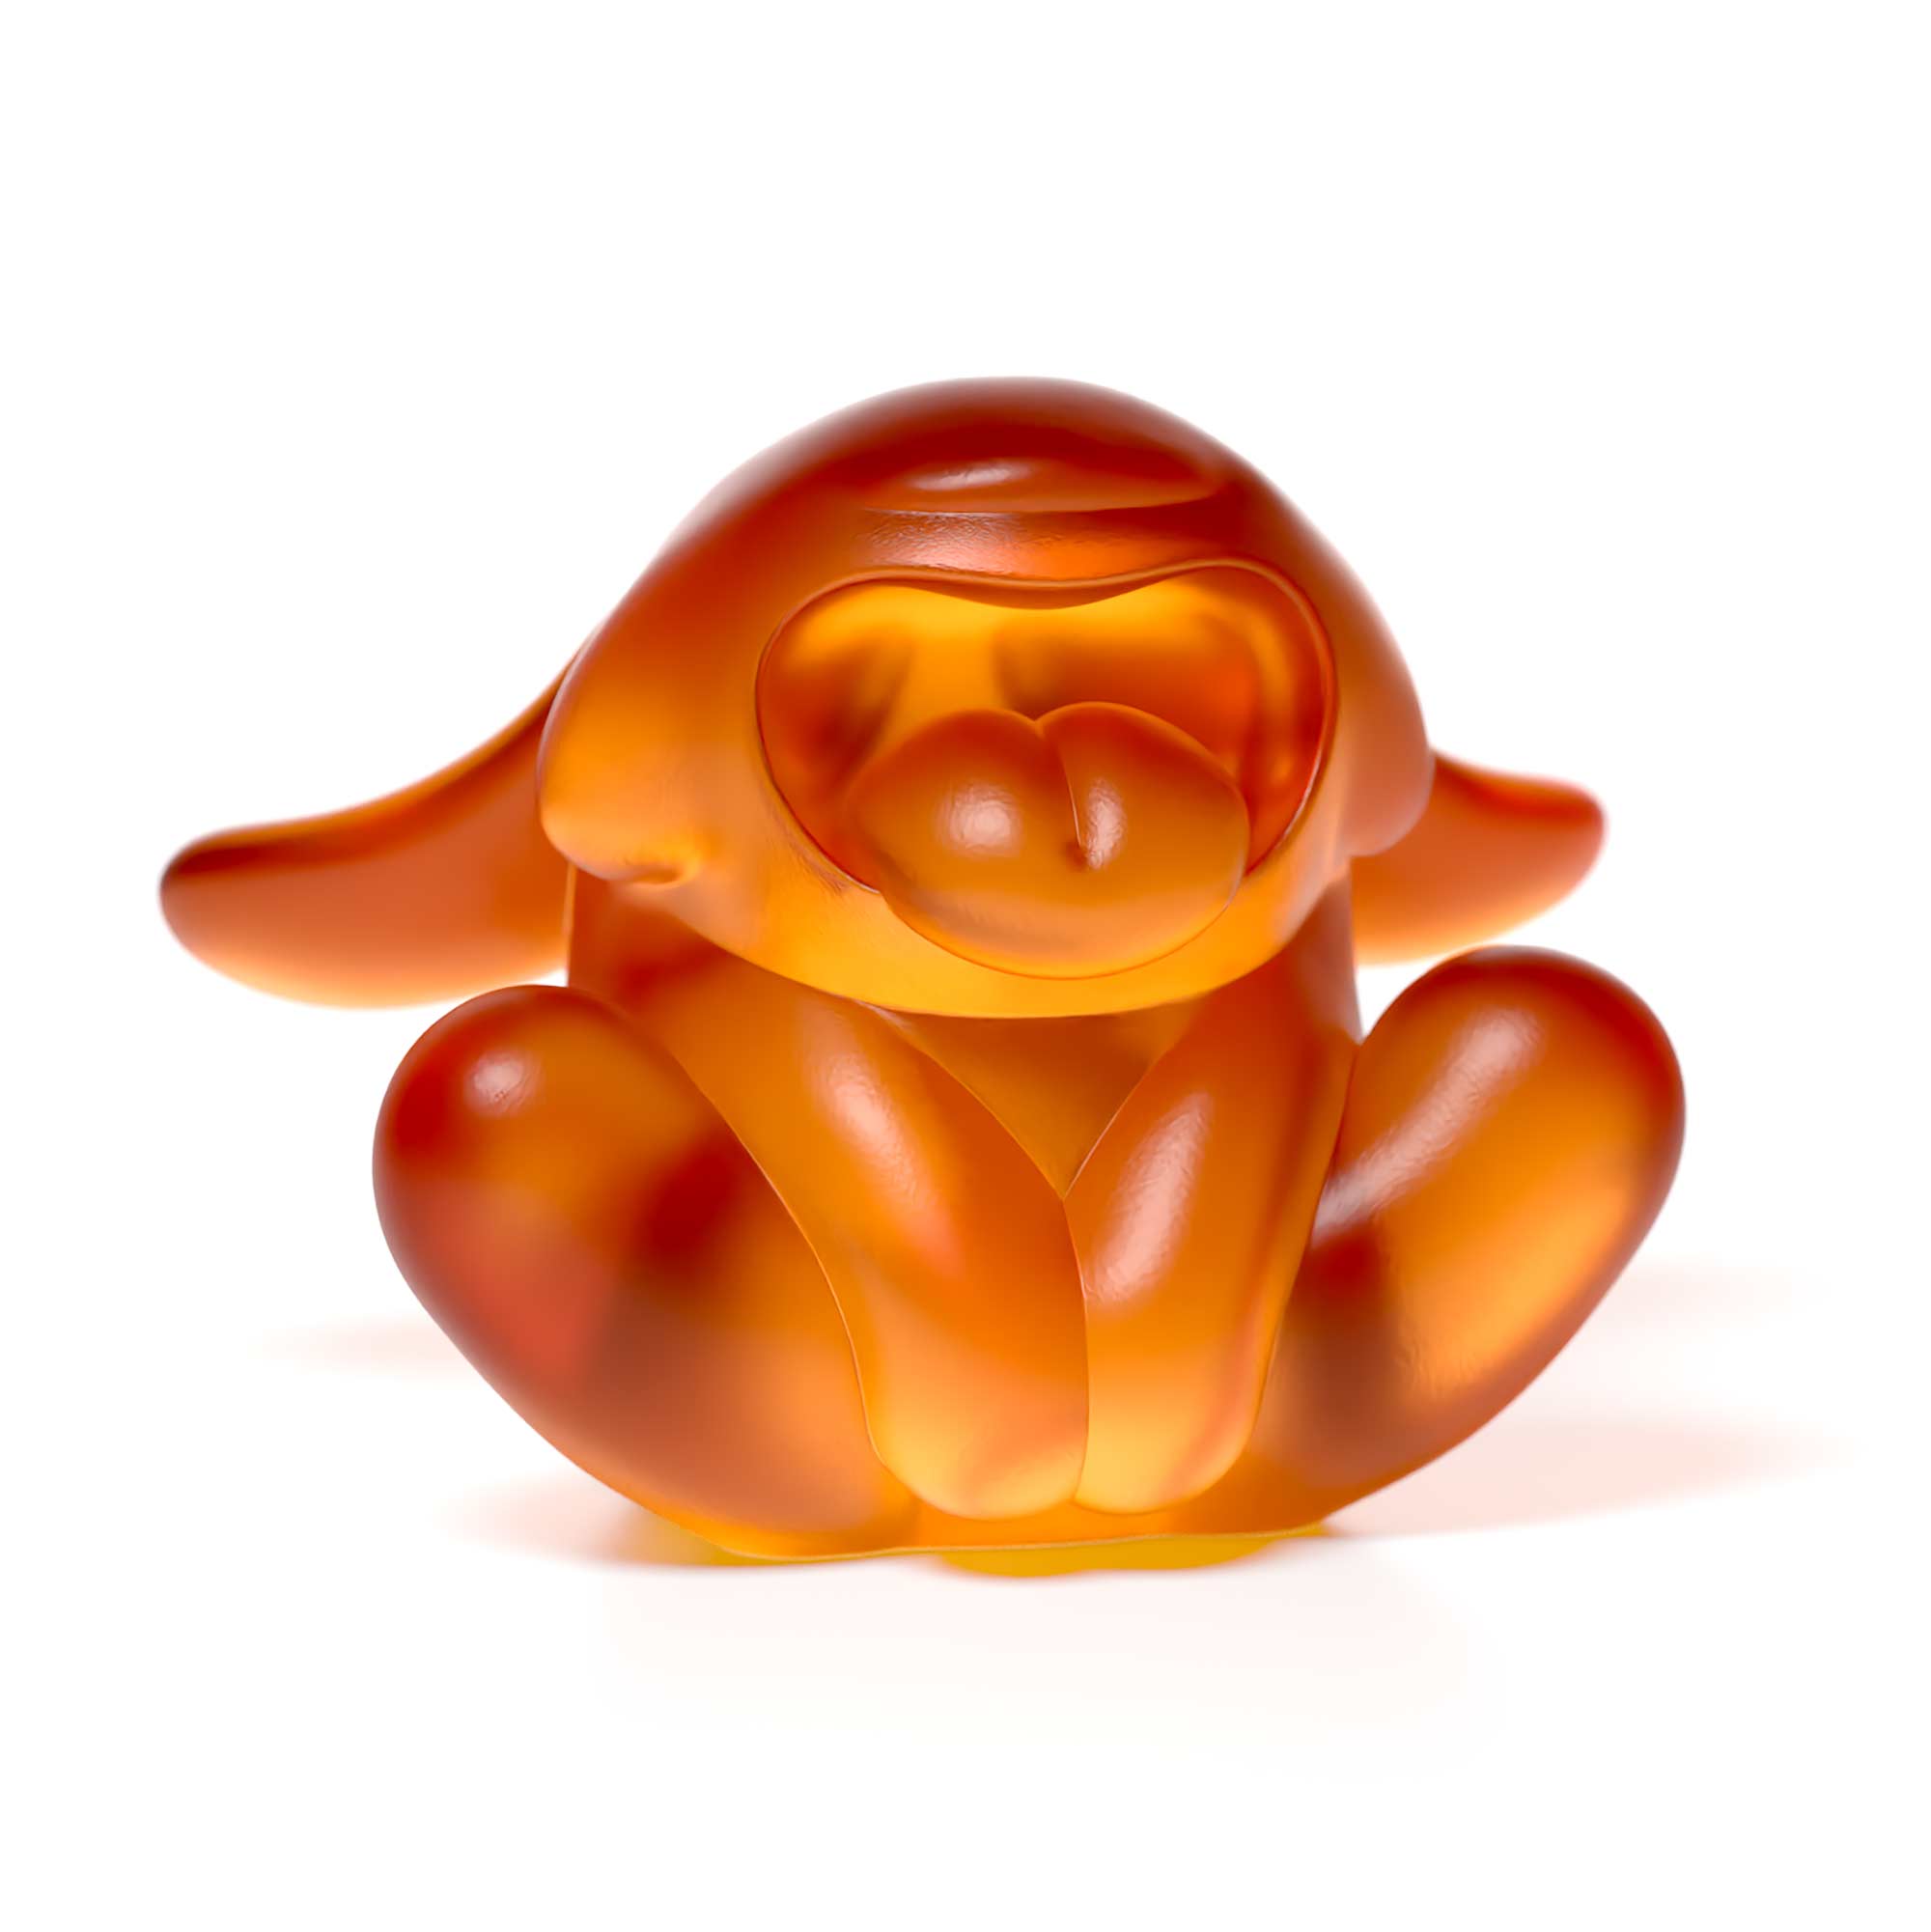 "Bunnie Roar Crystal," a sculpture, amber color, is an artistic creation by Ferdi B Dick 03 front view  